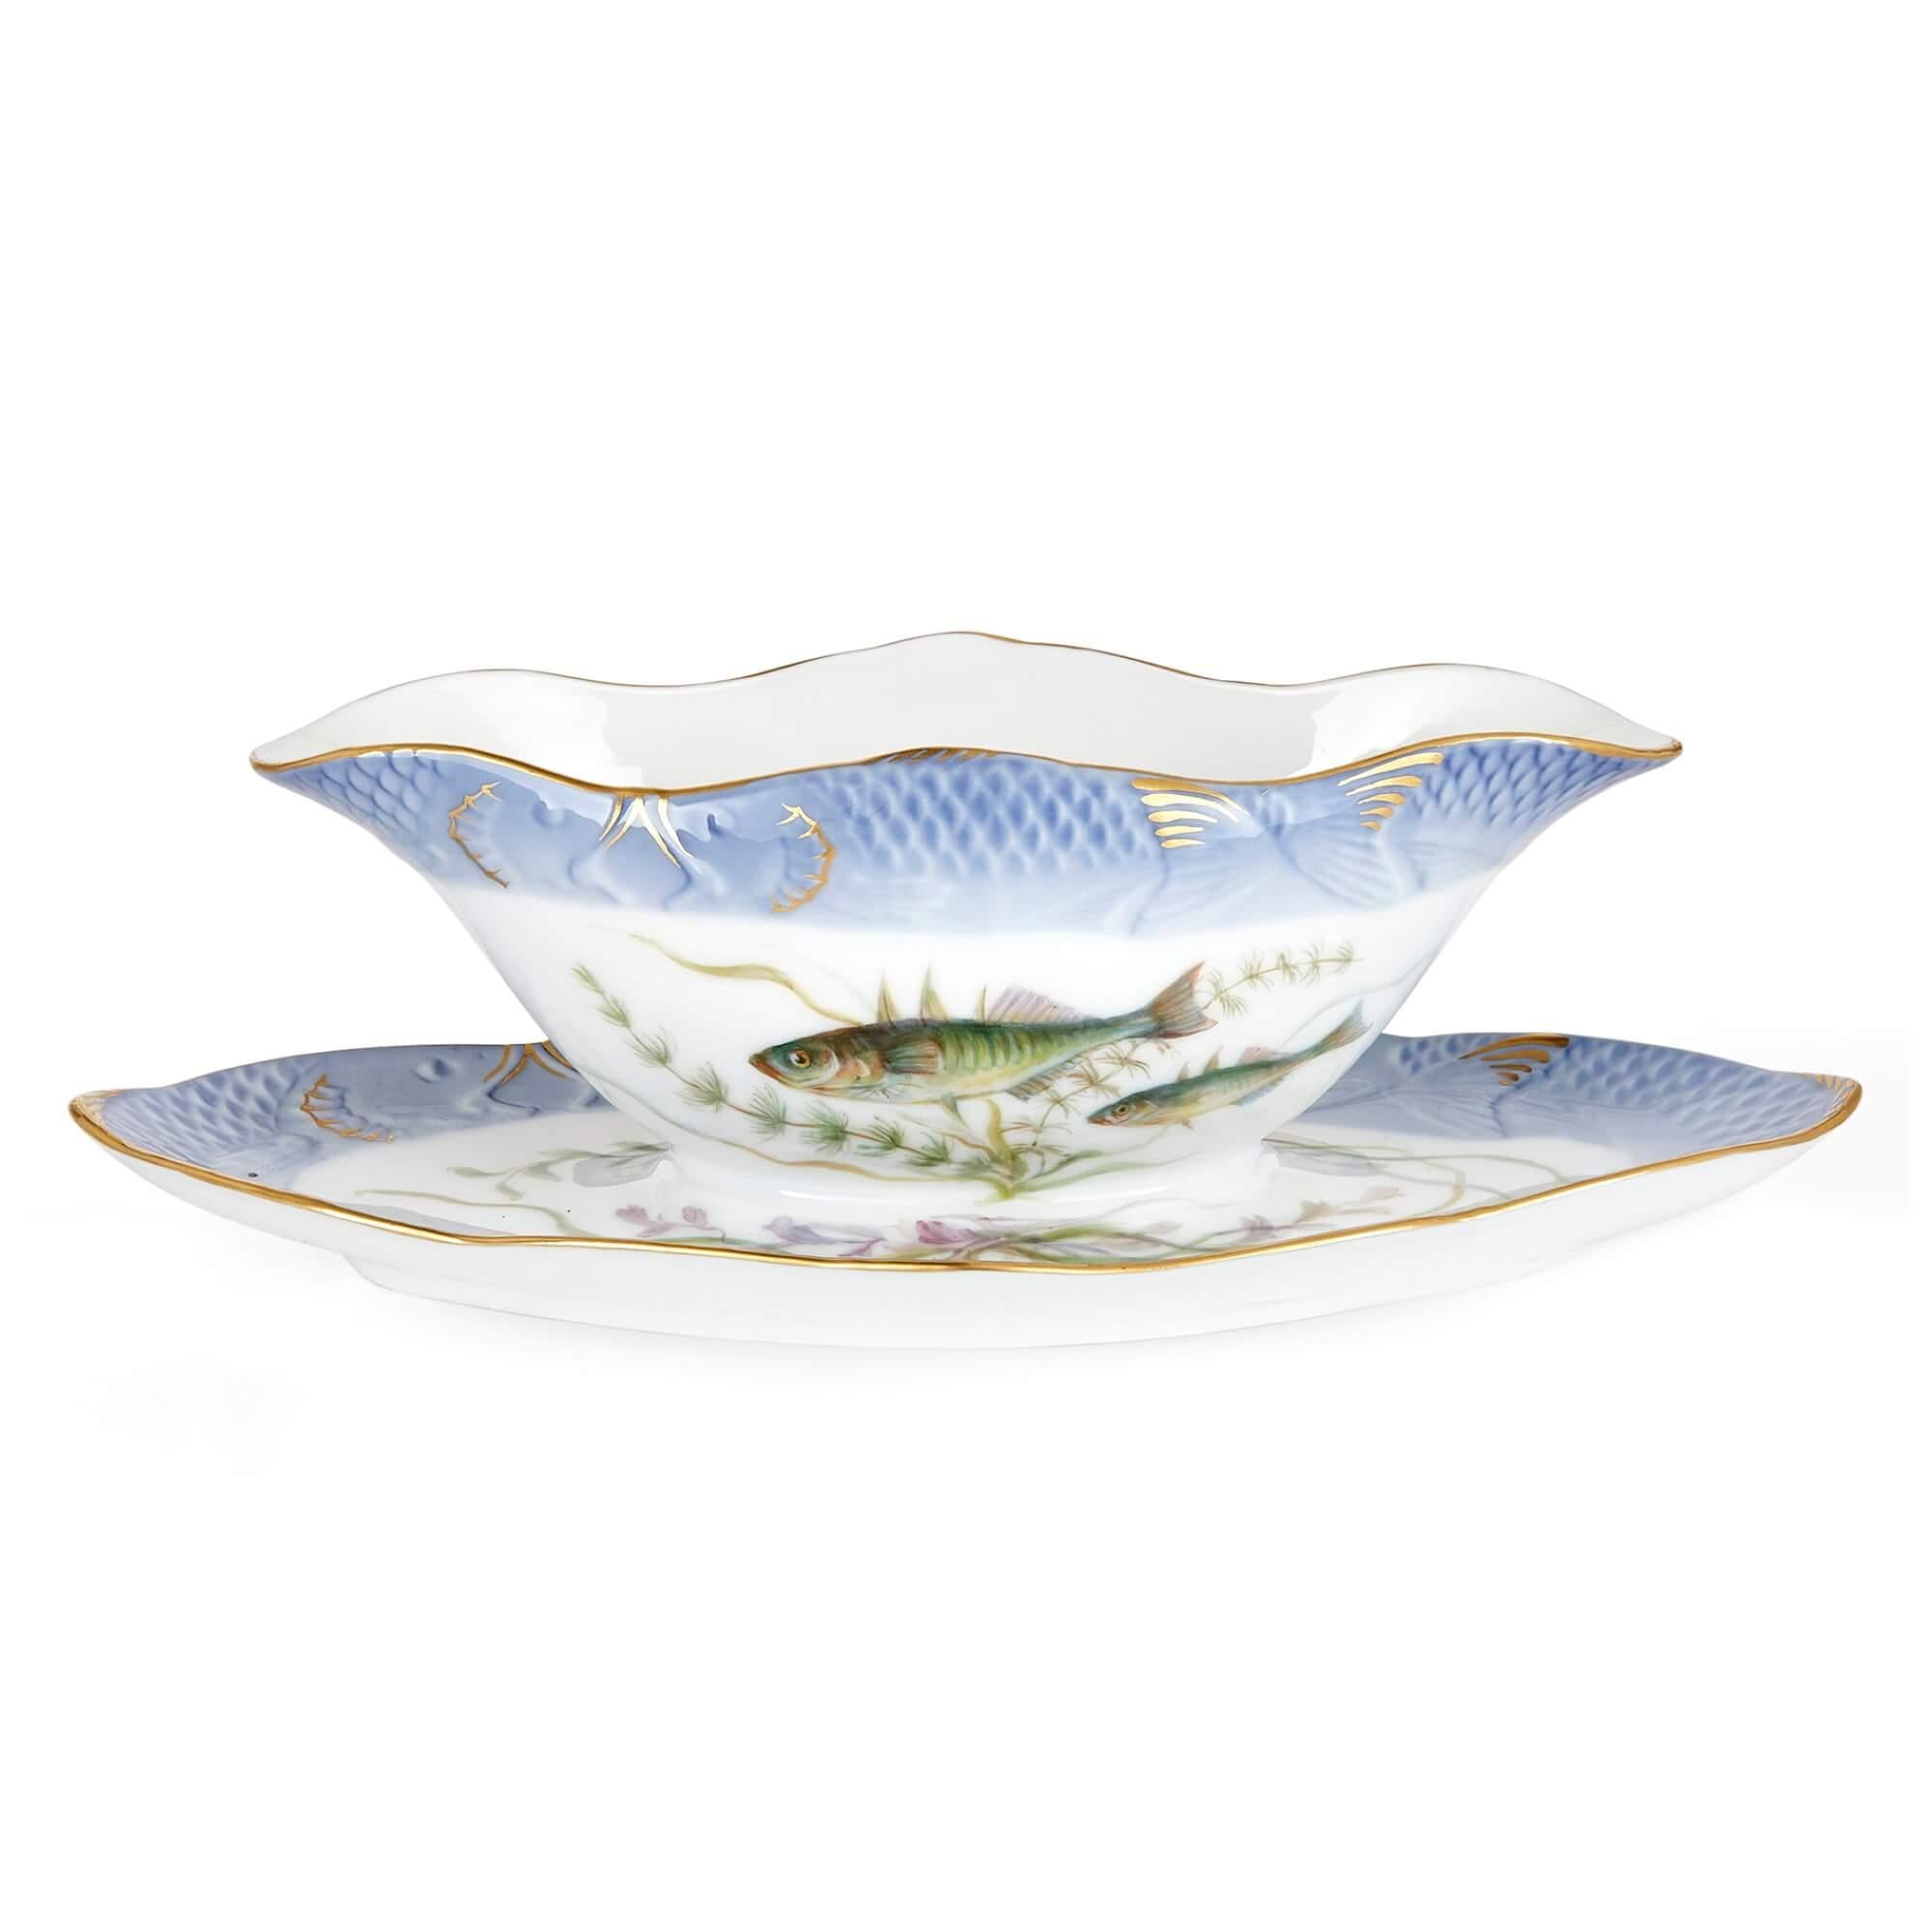 Royal Copenhagen Ichthyological Porcelain Part Dinner 'Fish-Service' In Excellent Condition For Sale In London, GB